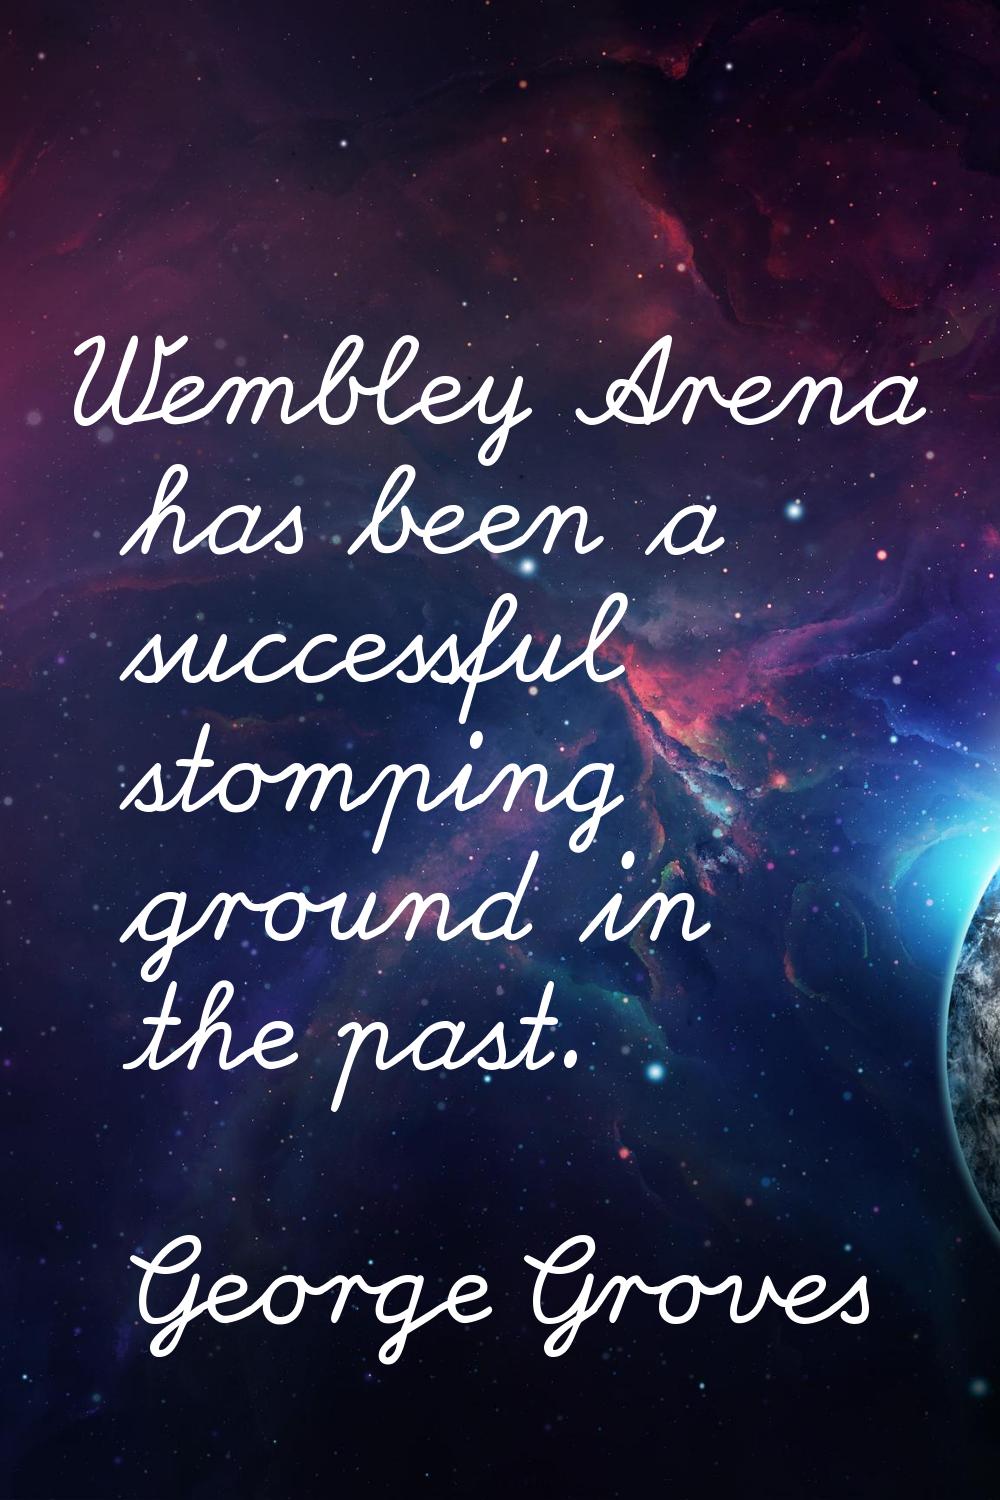 Wembley Arena has been a successful stomping ground in the past.